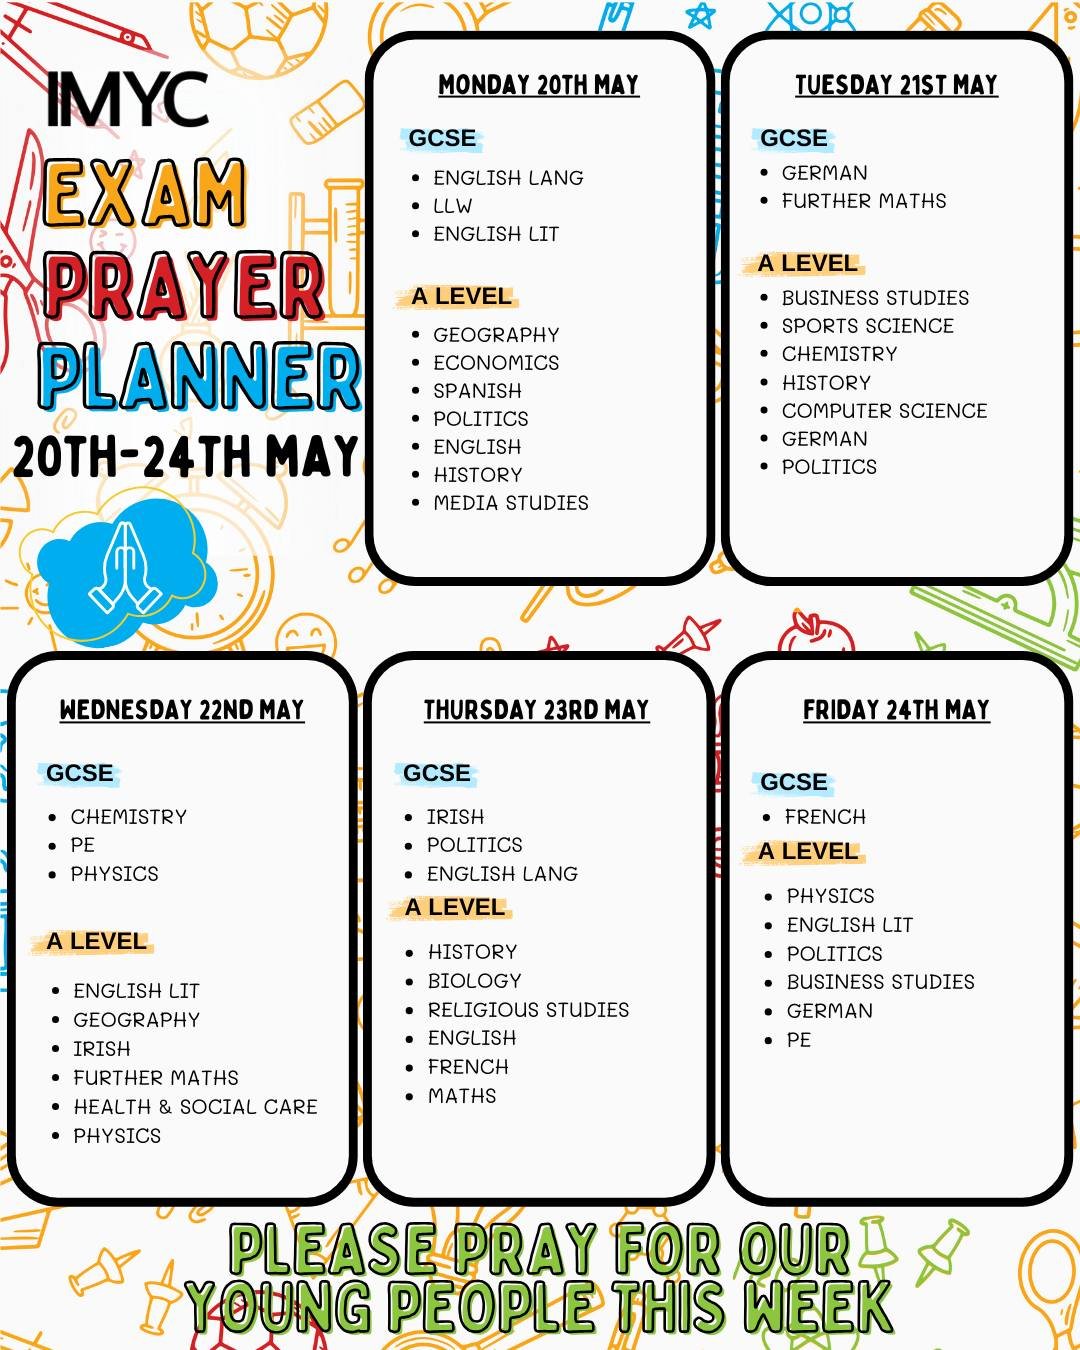 📝 WEEK 3 OF EXAMS 📝

We are heading into a very busy week of exams.
We are praying for you as you go into this week 🙏

Know that God goes with you 🙌